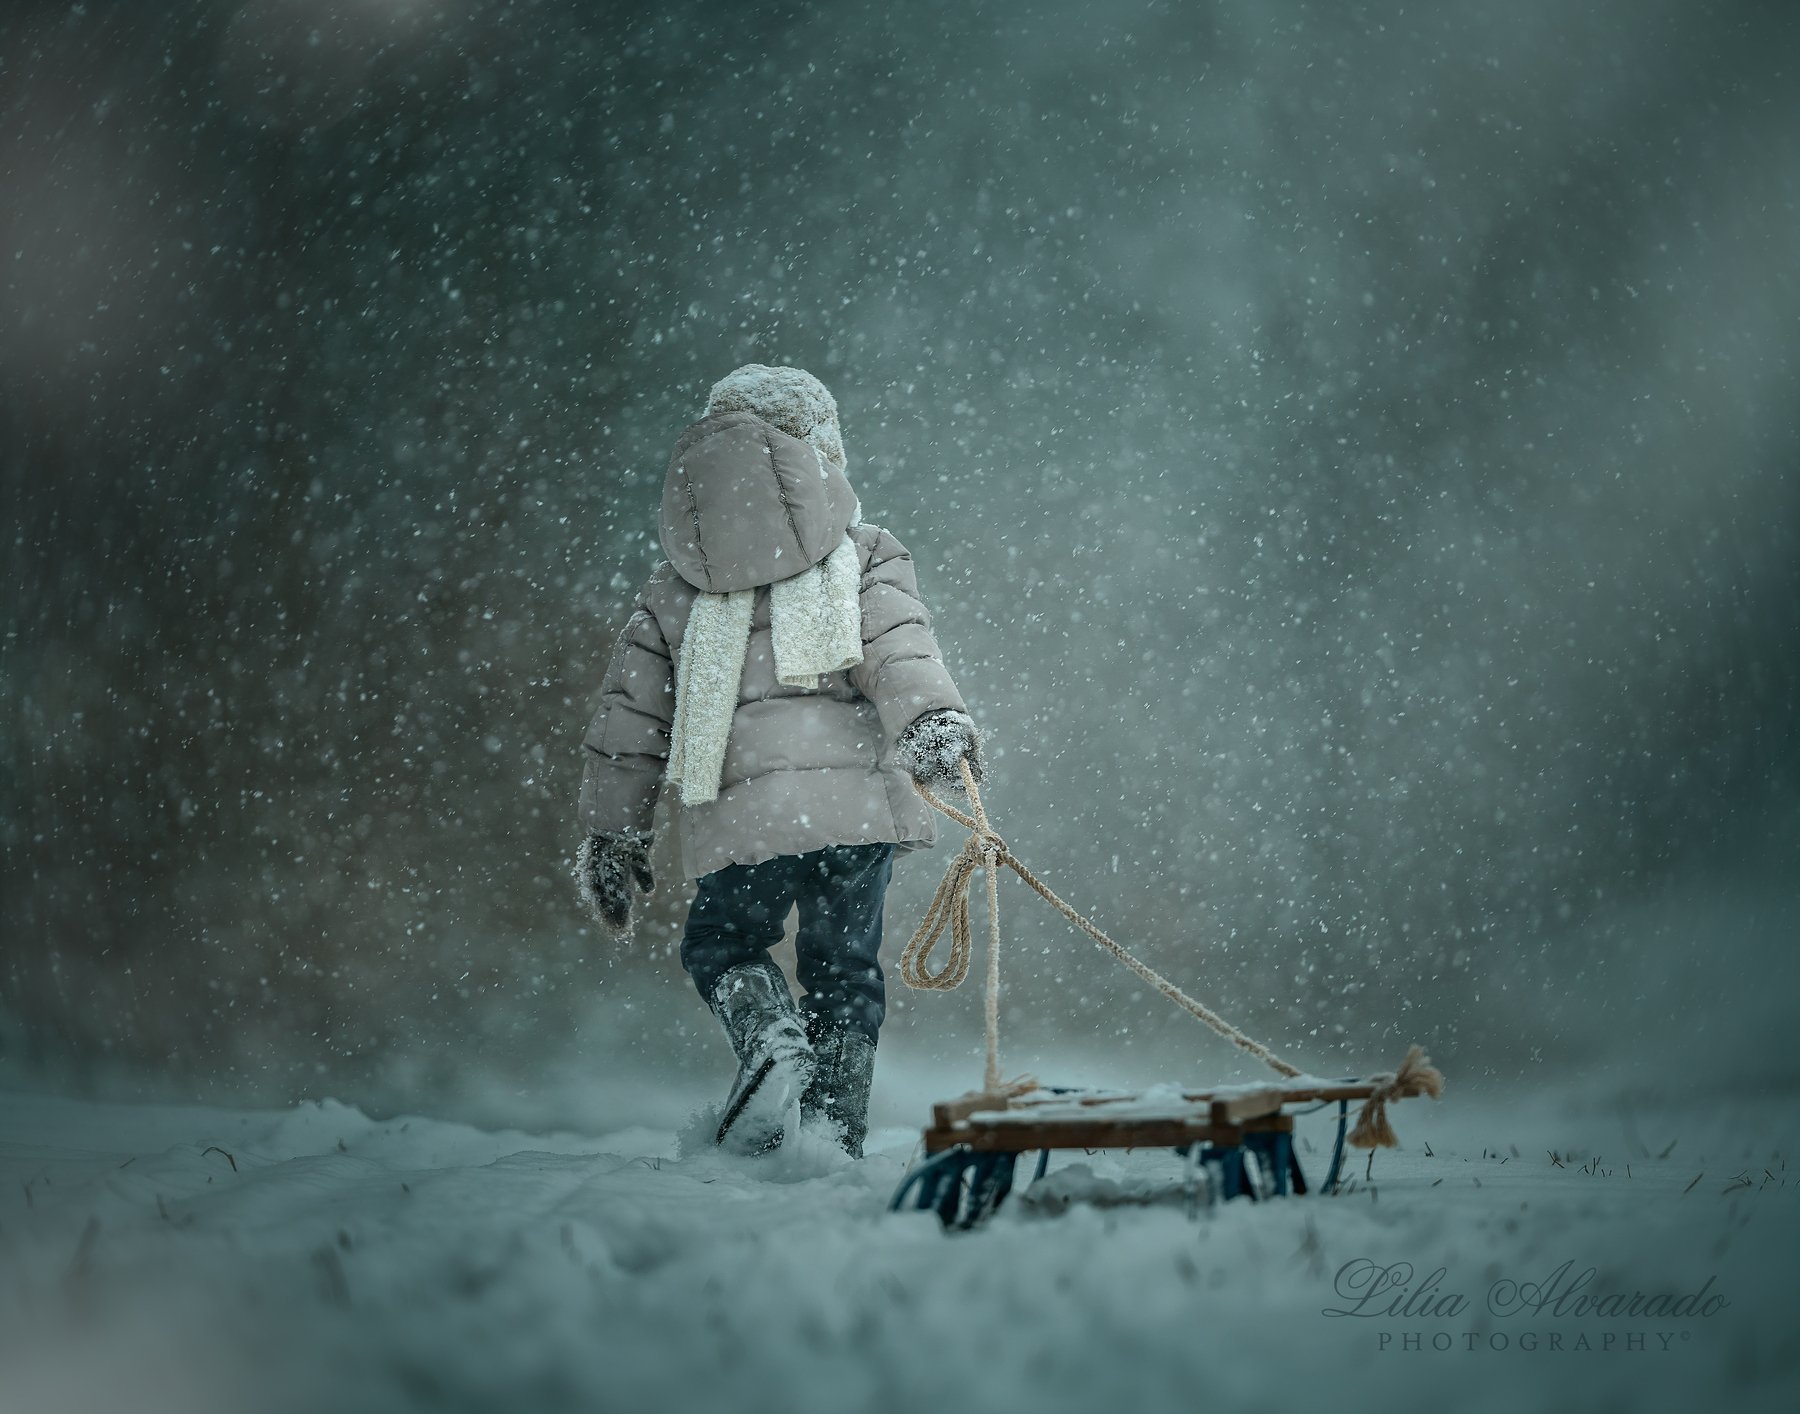 wind,snow,winter,whiteout, sled,cold,candid,walking,light,gale, Lilia Alvarado